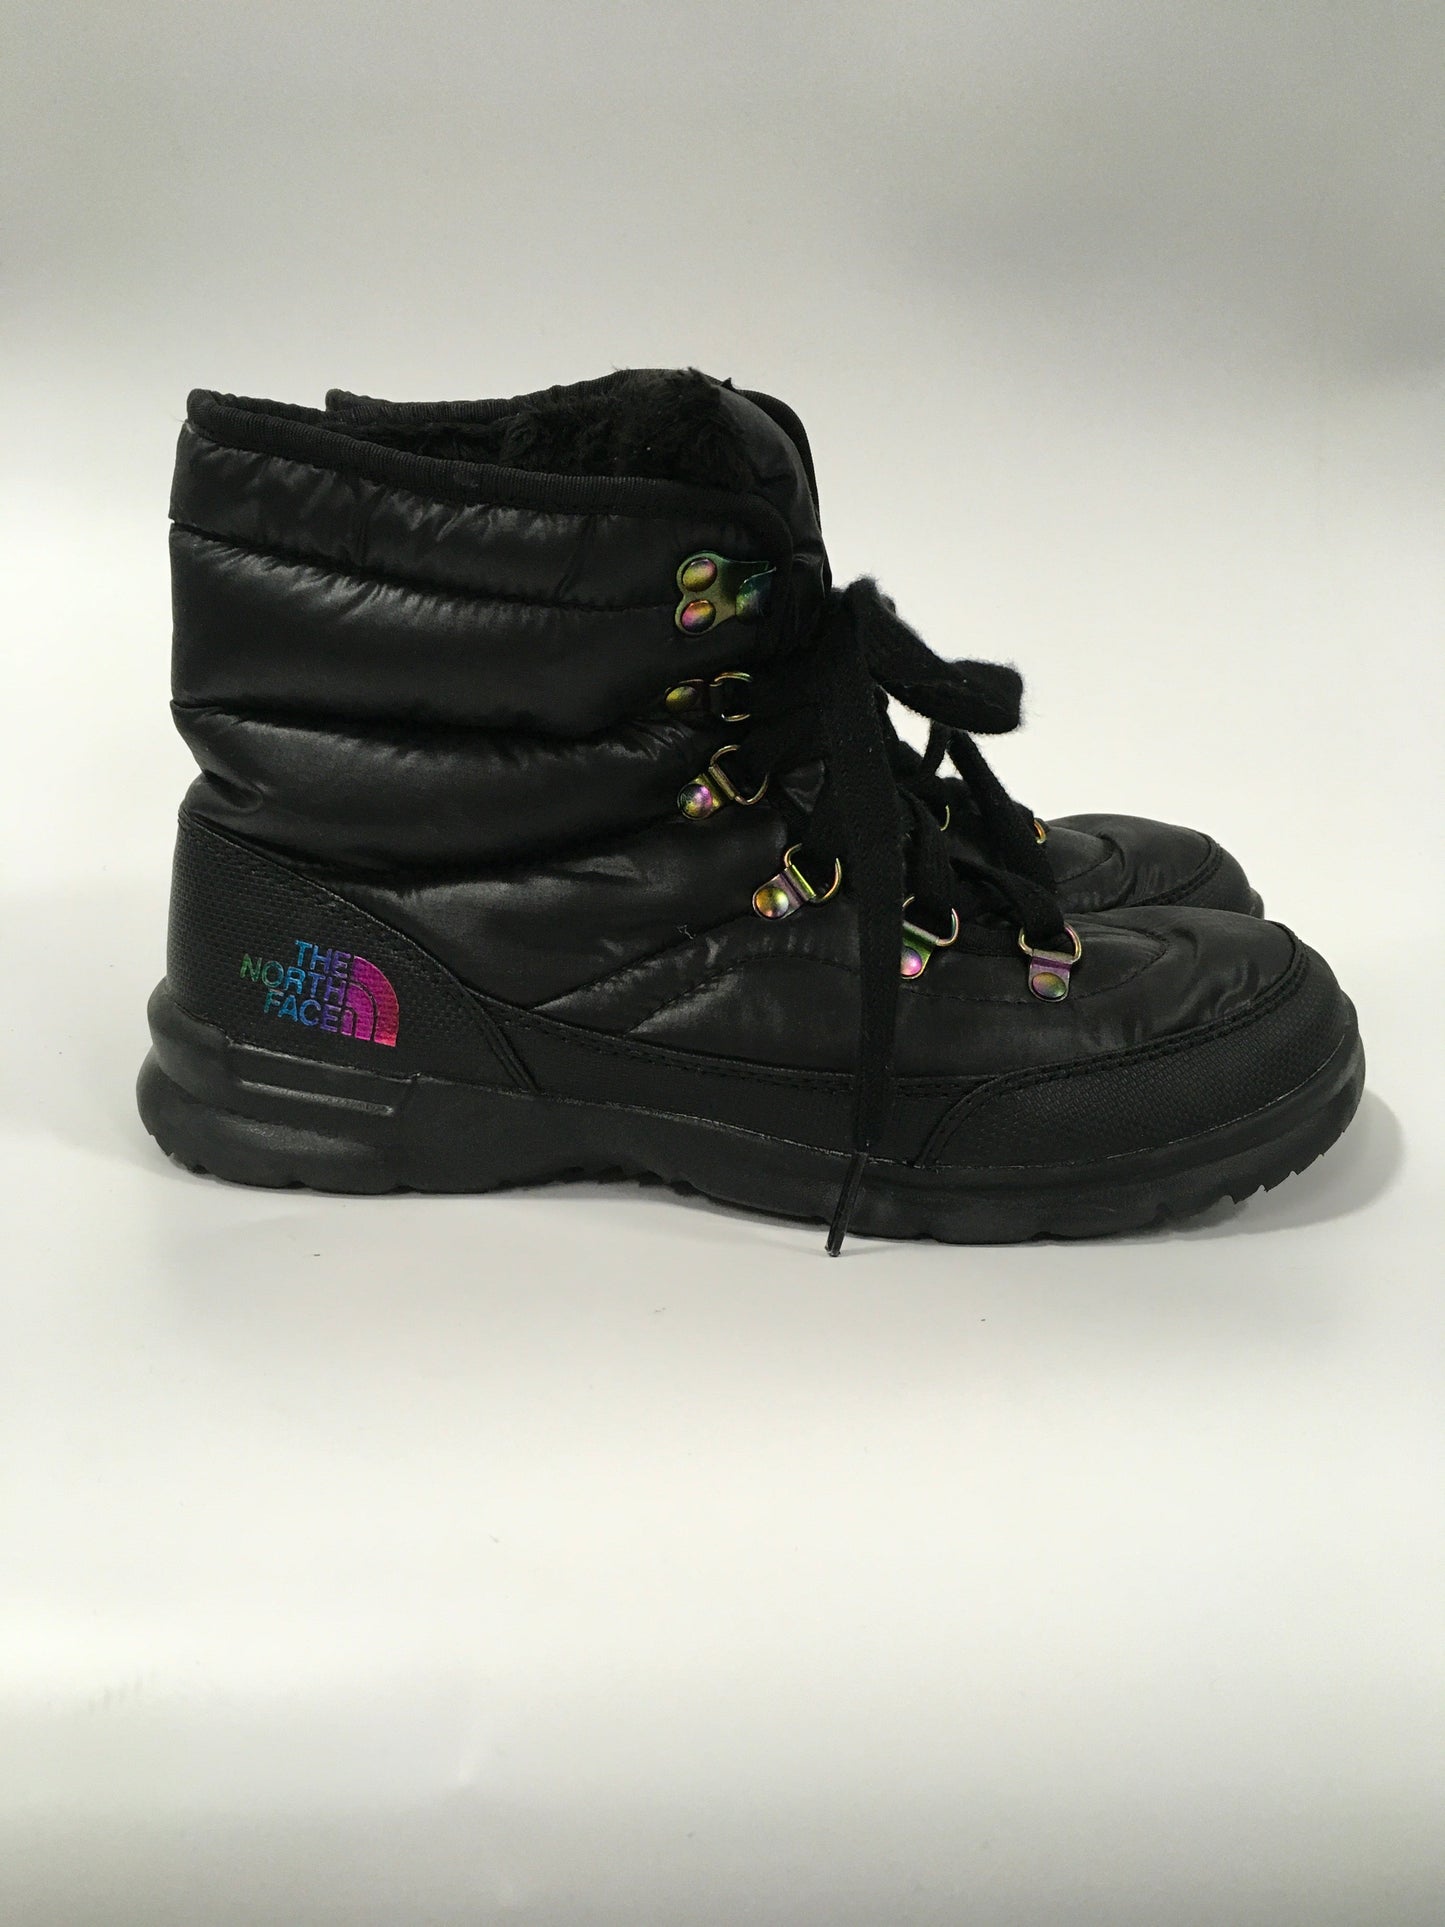 Black Boots Snow North Face, Size 7